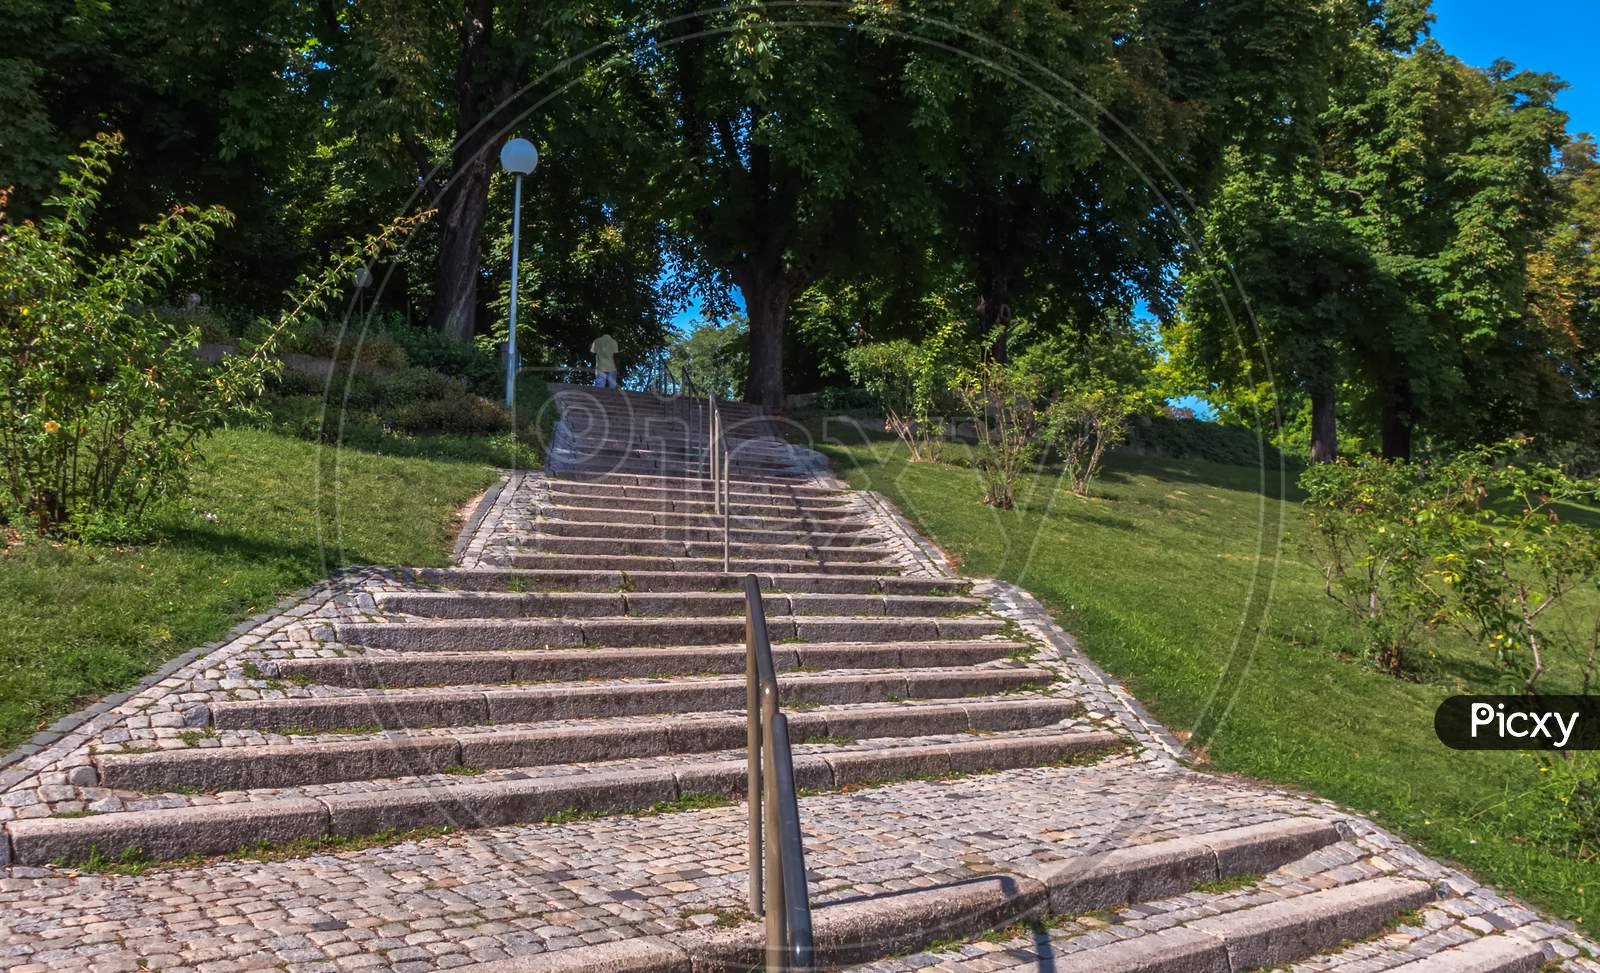 Stairs In A Park Of An Urban City